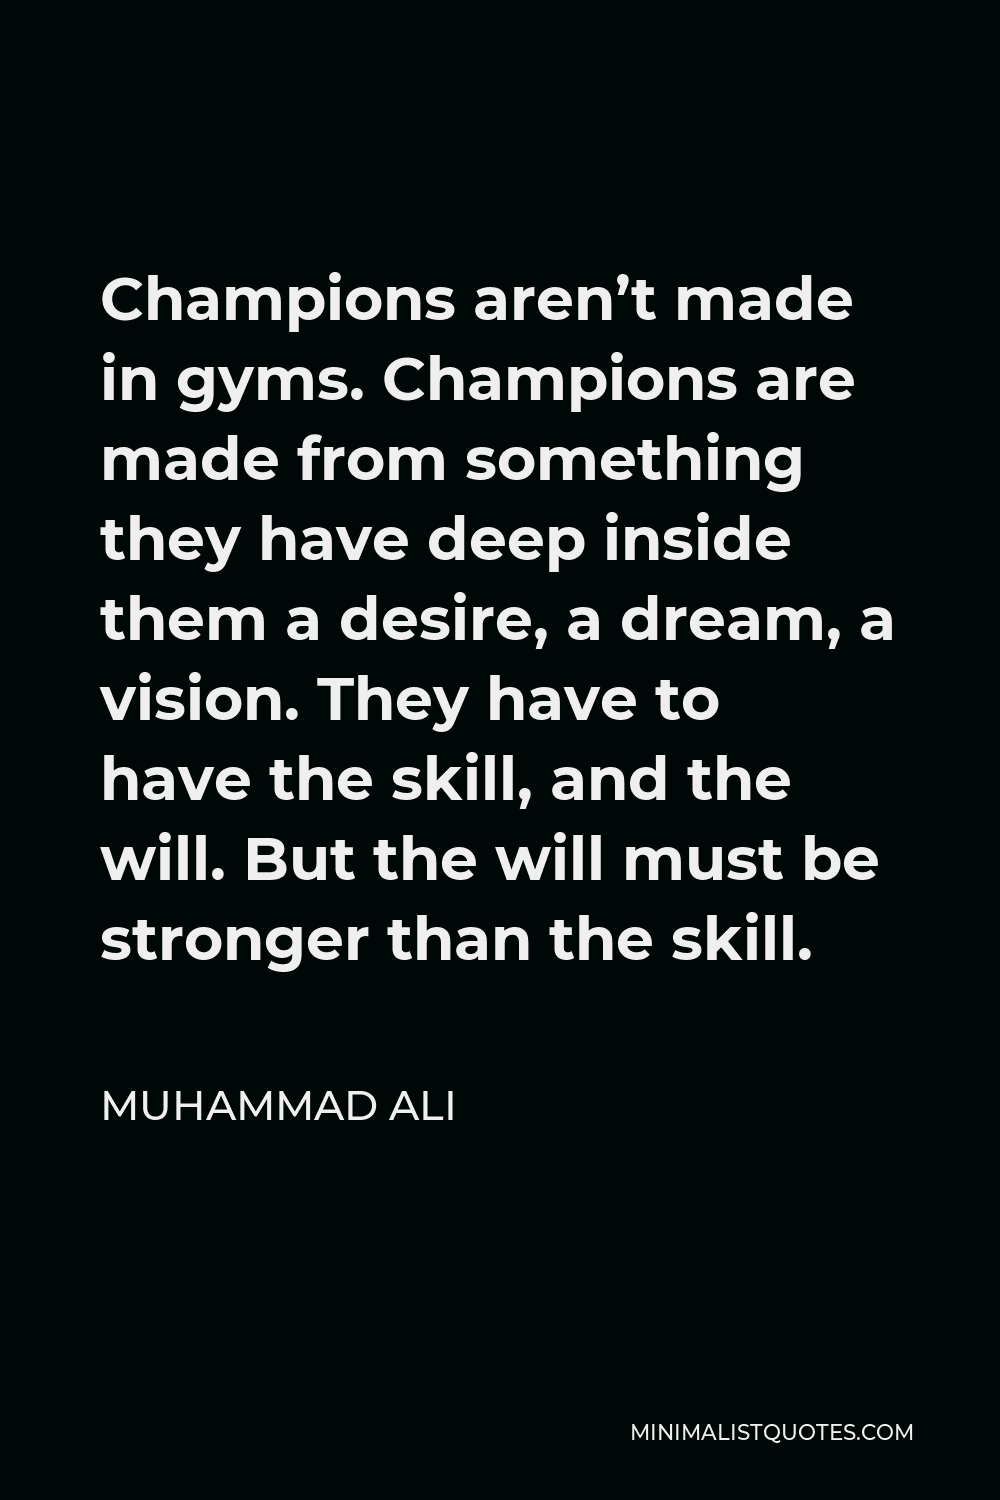 Muhammad Ali Quote - Champions aren’t made in gyms. Champions are made from something they have deep inside them a desire, a dream, a vision. They have to have the skill, and the will. But the will must be stronger than the skill.